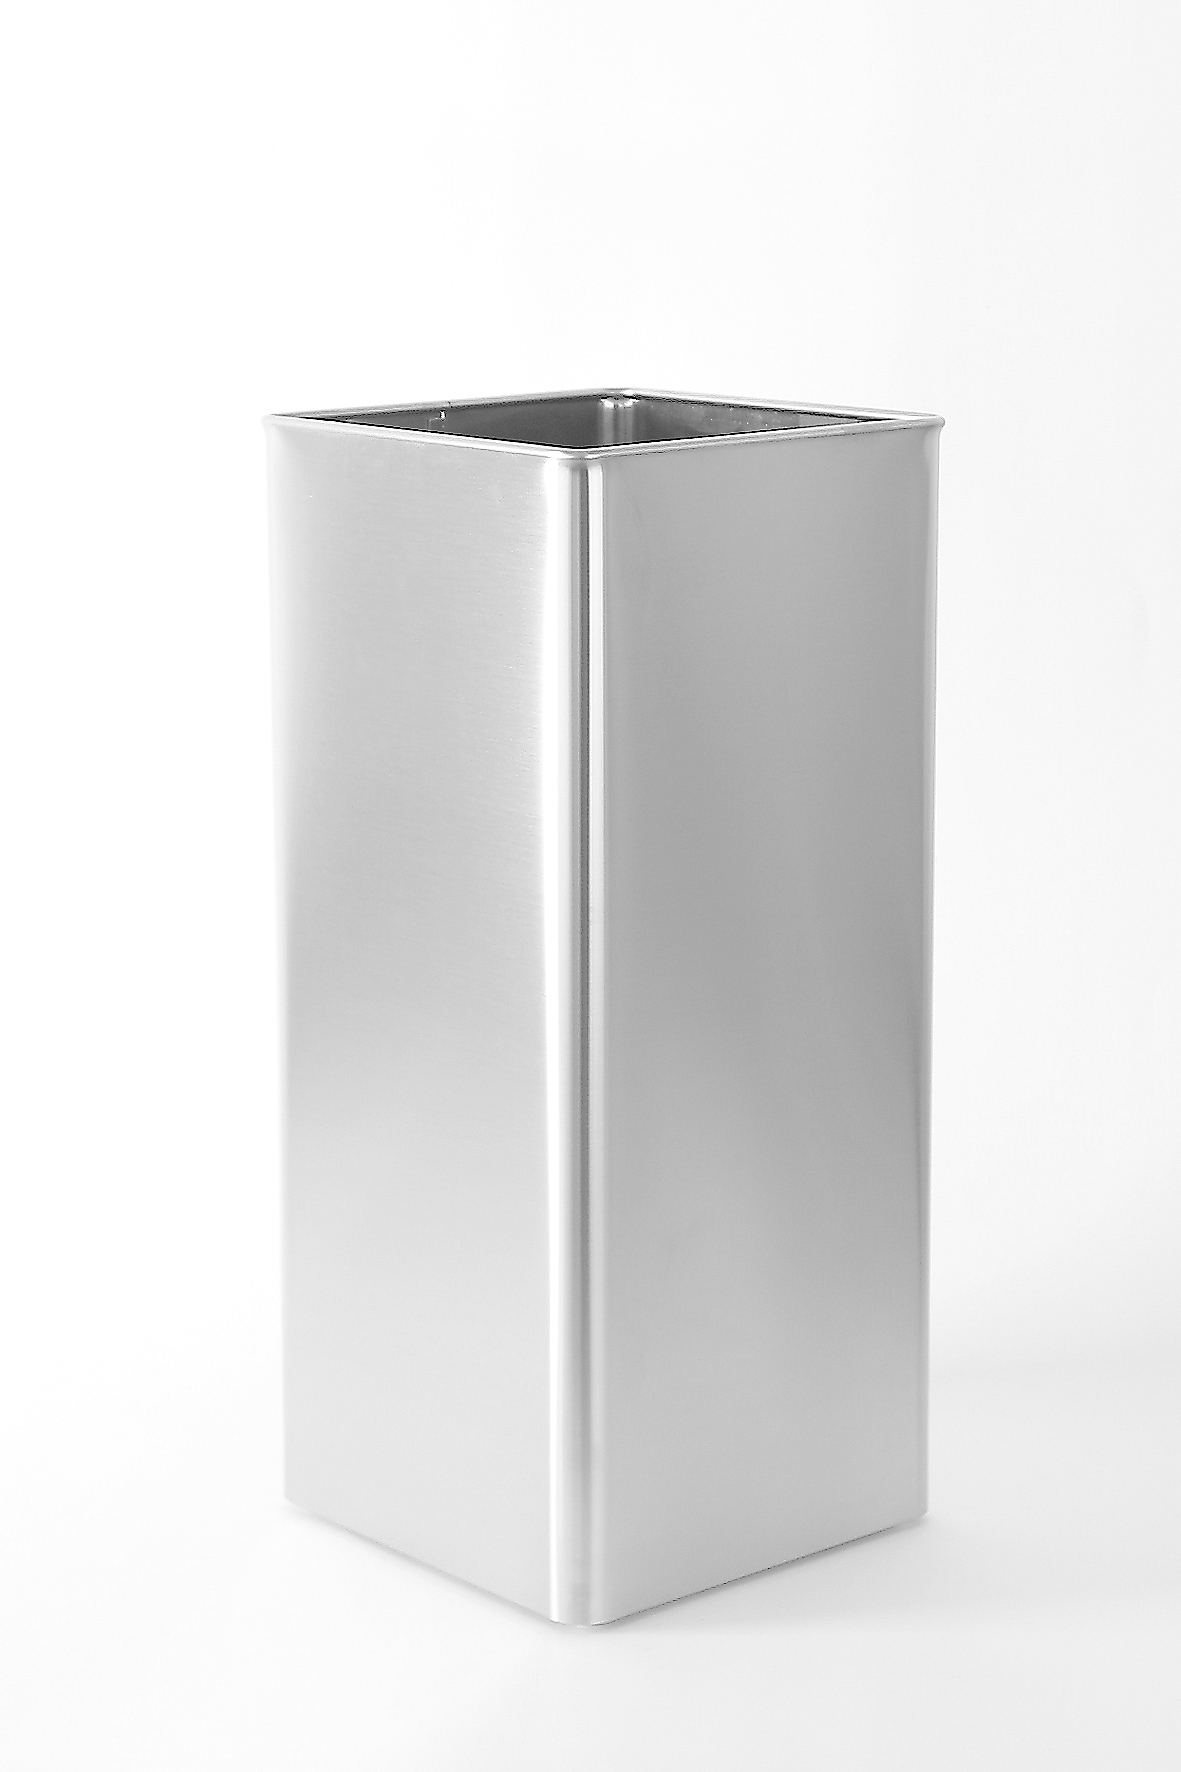 Stainless Steel ZACK Angolo Umbrella Stand 50478 